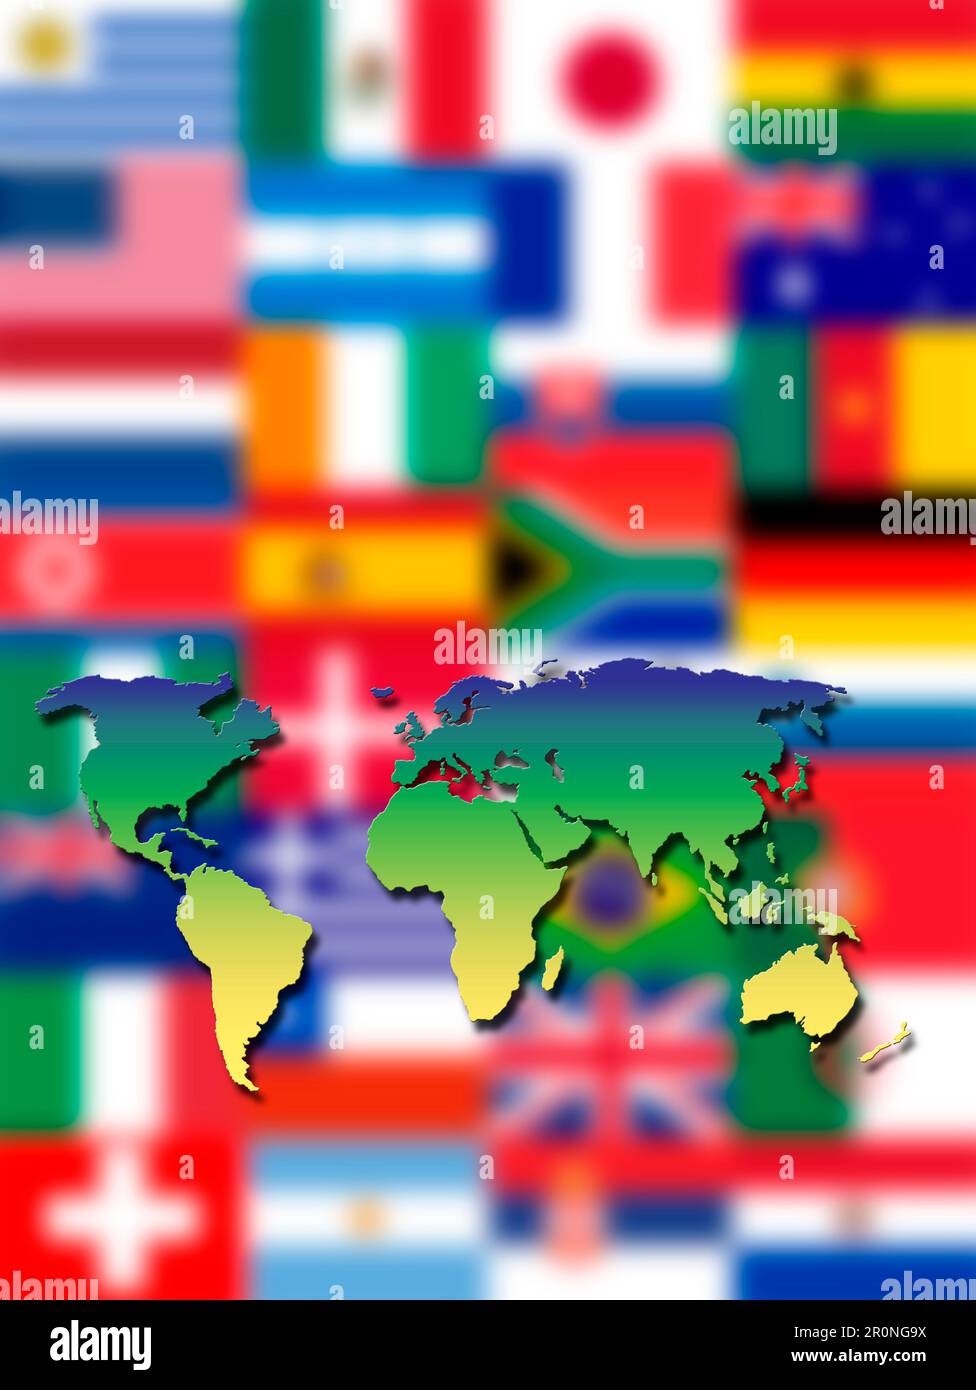 world map and background of flags of the nations Stock Photo